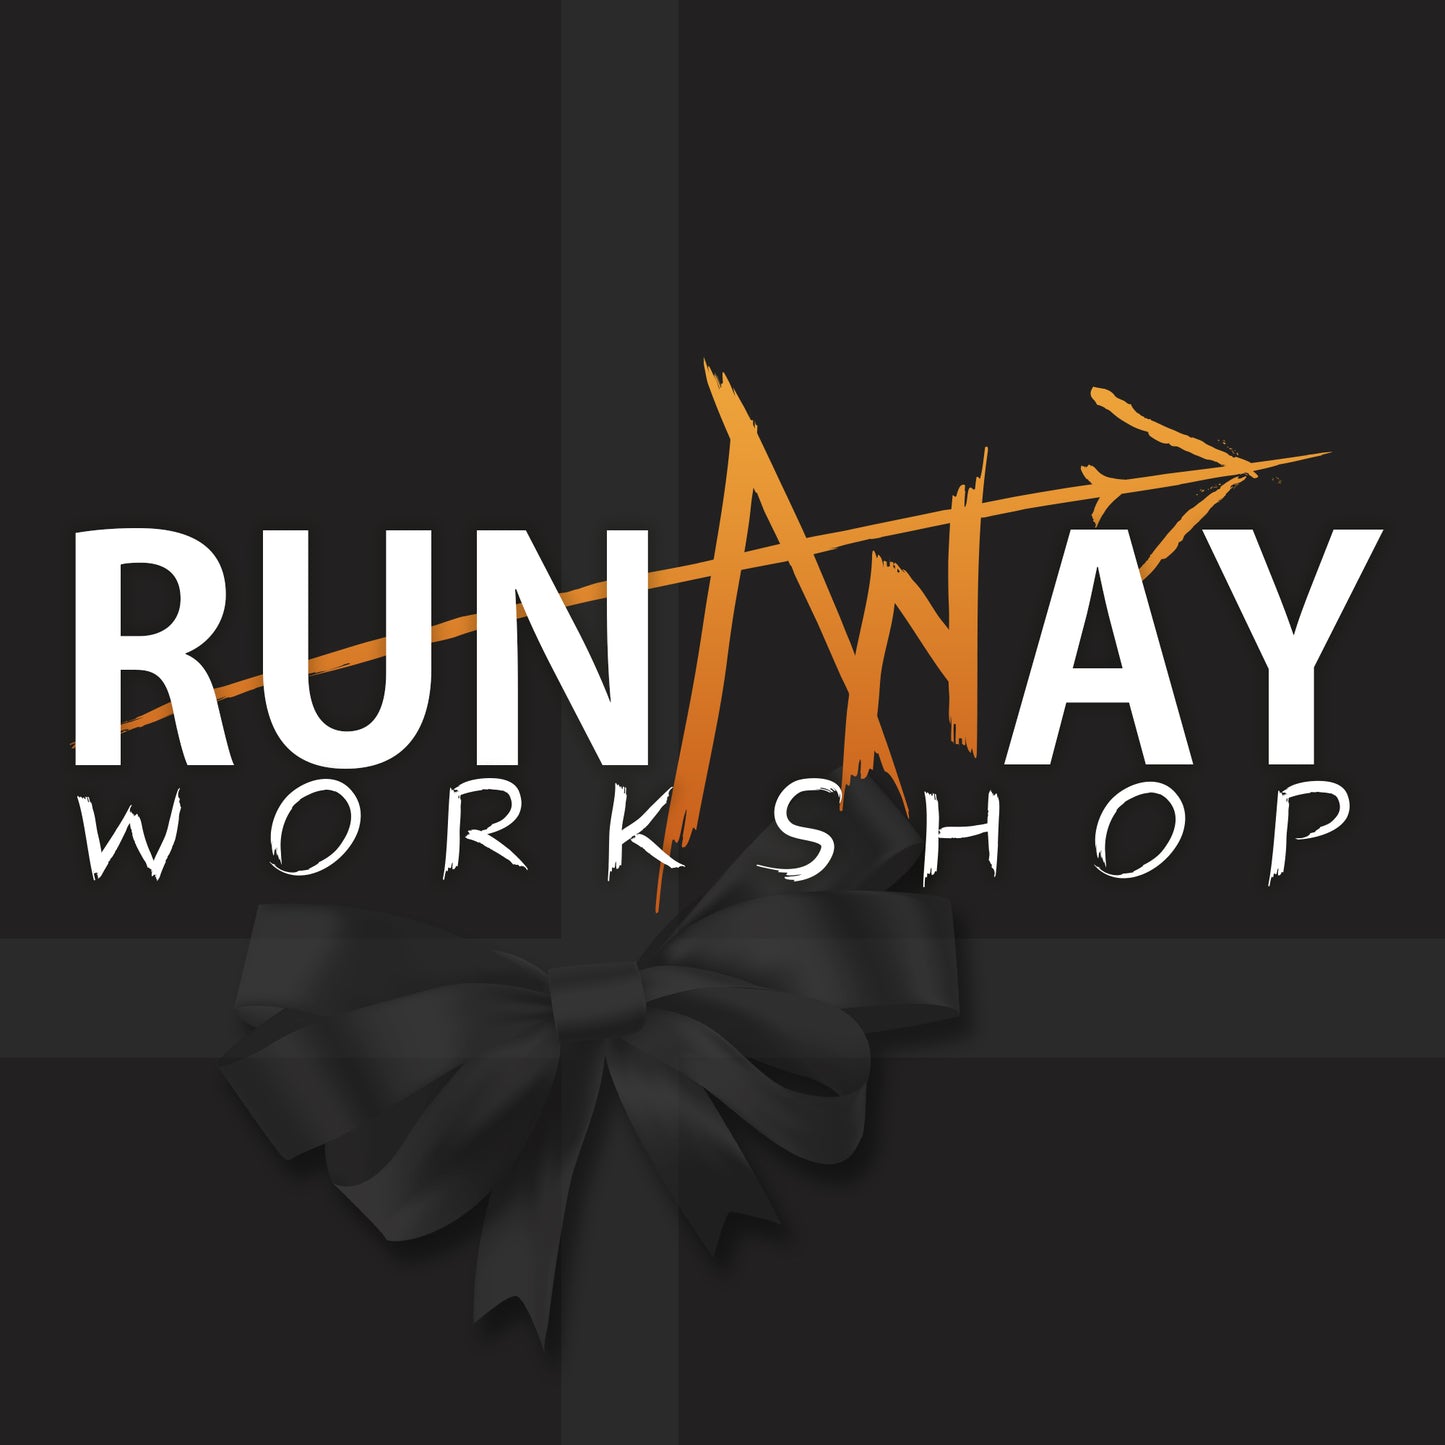 Gift card for Runaway workshop web store